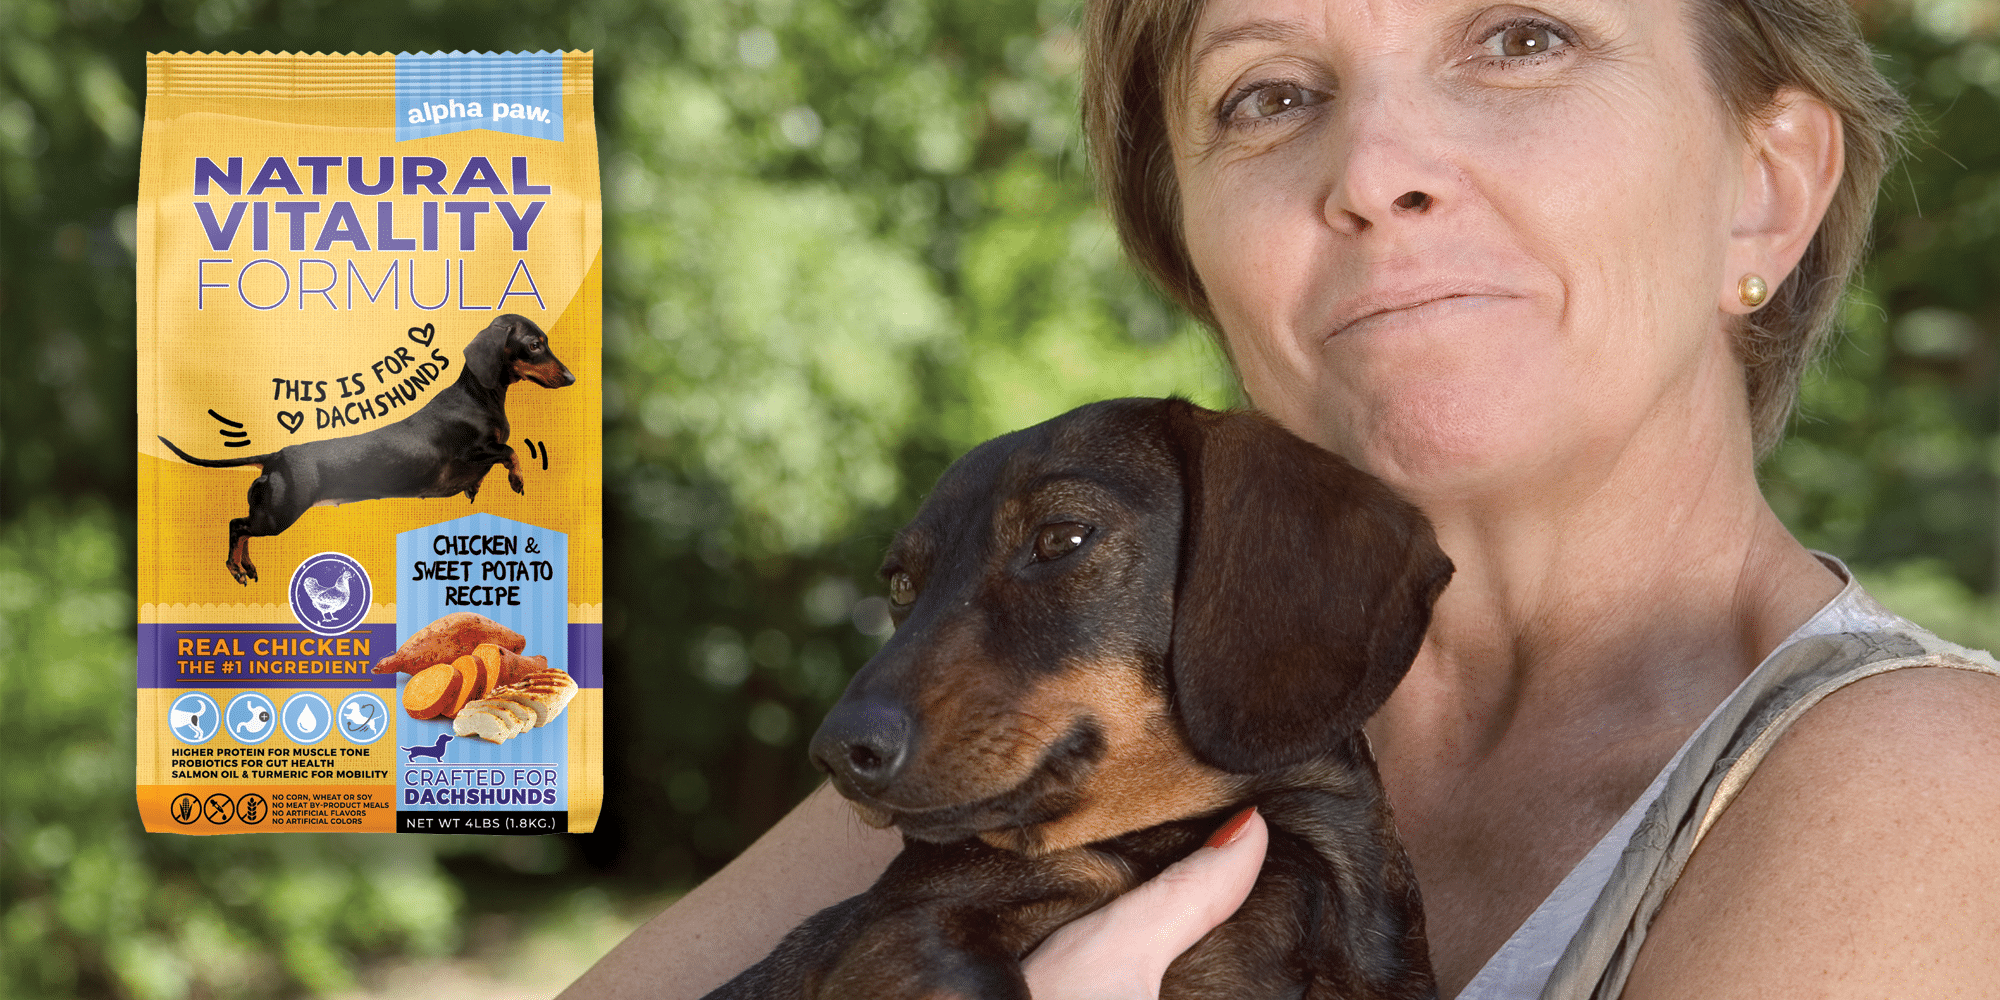 7 reasons why dachshunds are switching to this kibble